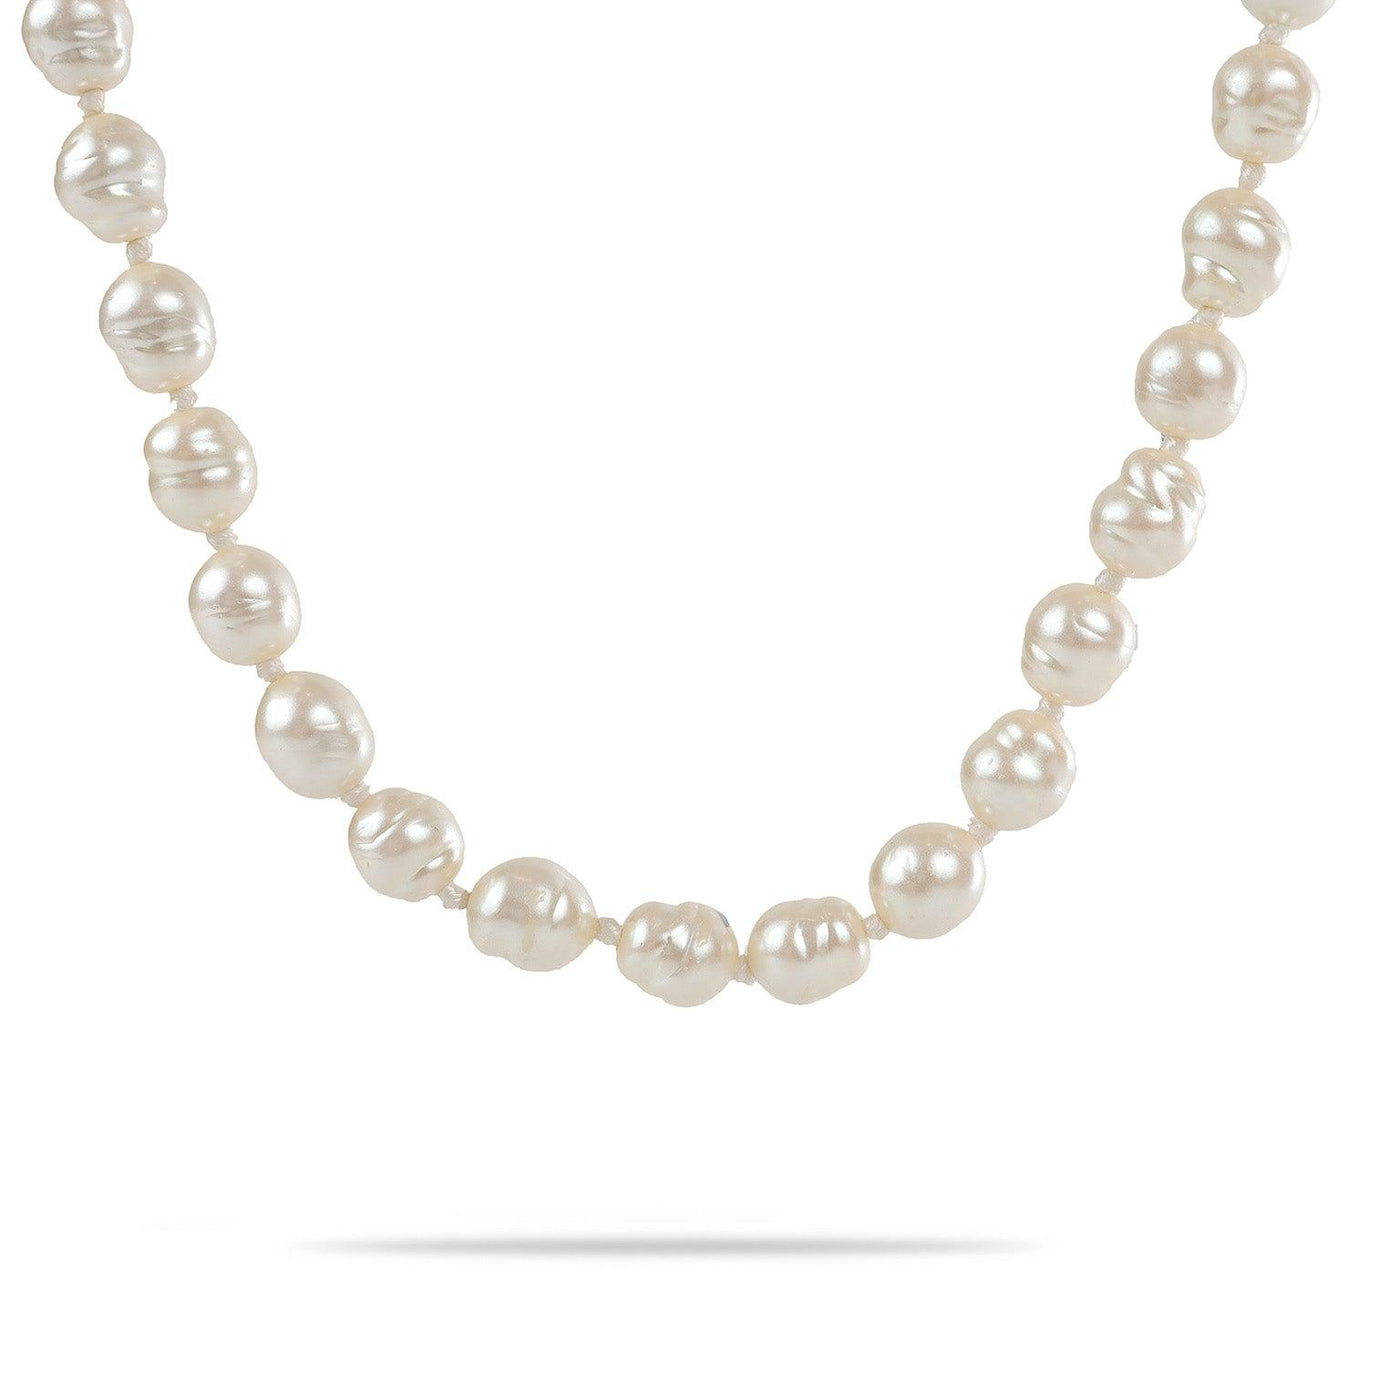 Chanel Long White Pearl Necklace - Only Authentics